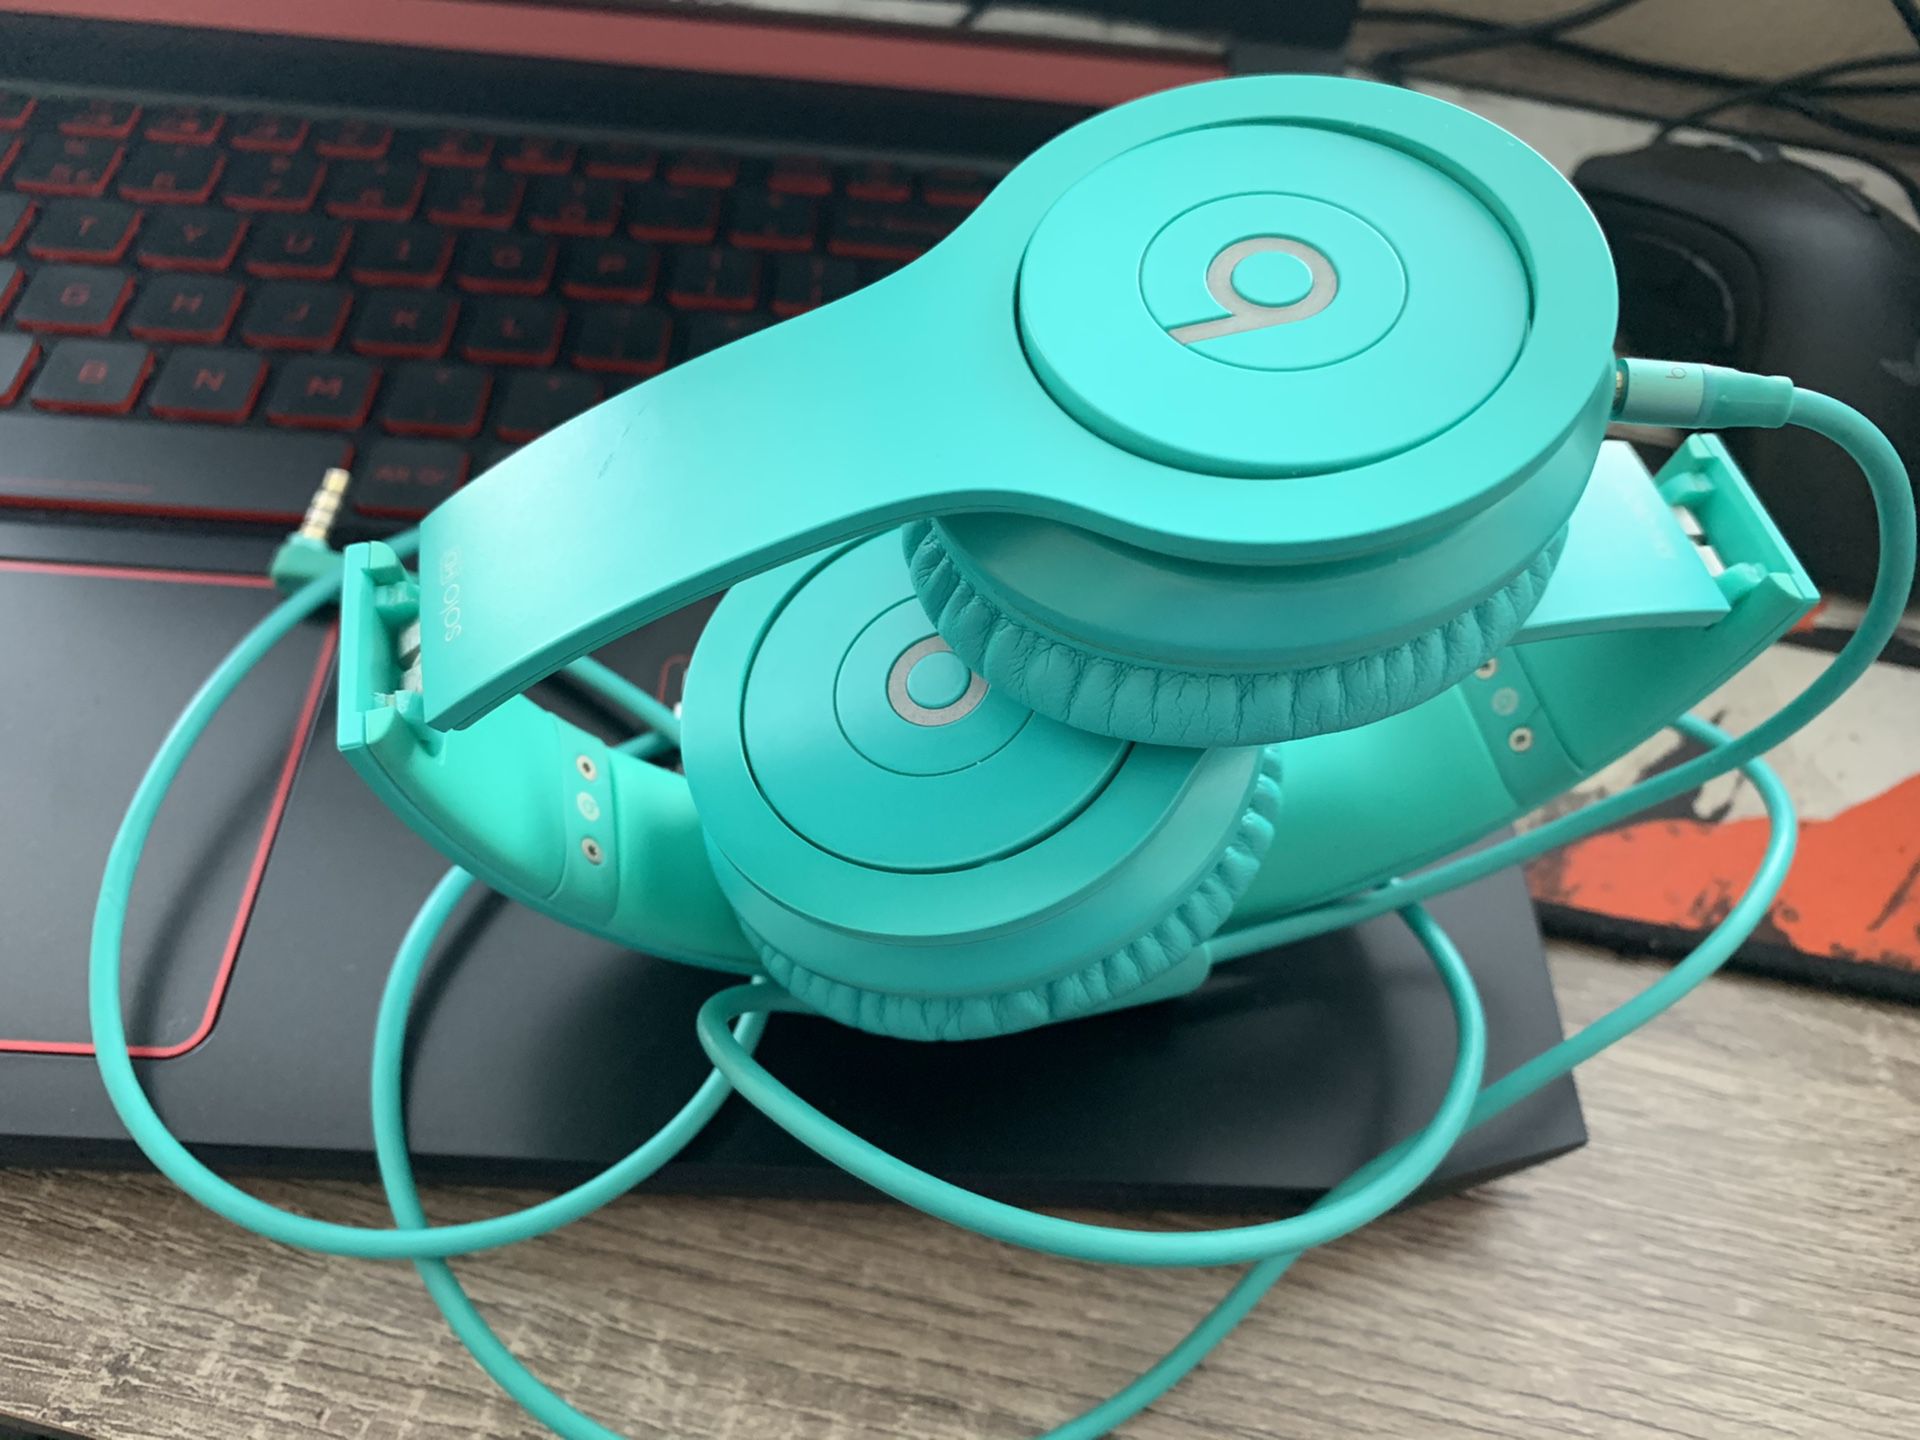 Limited color beats headset